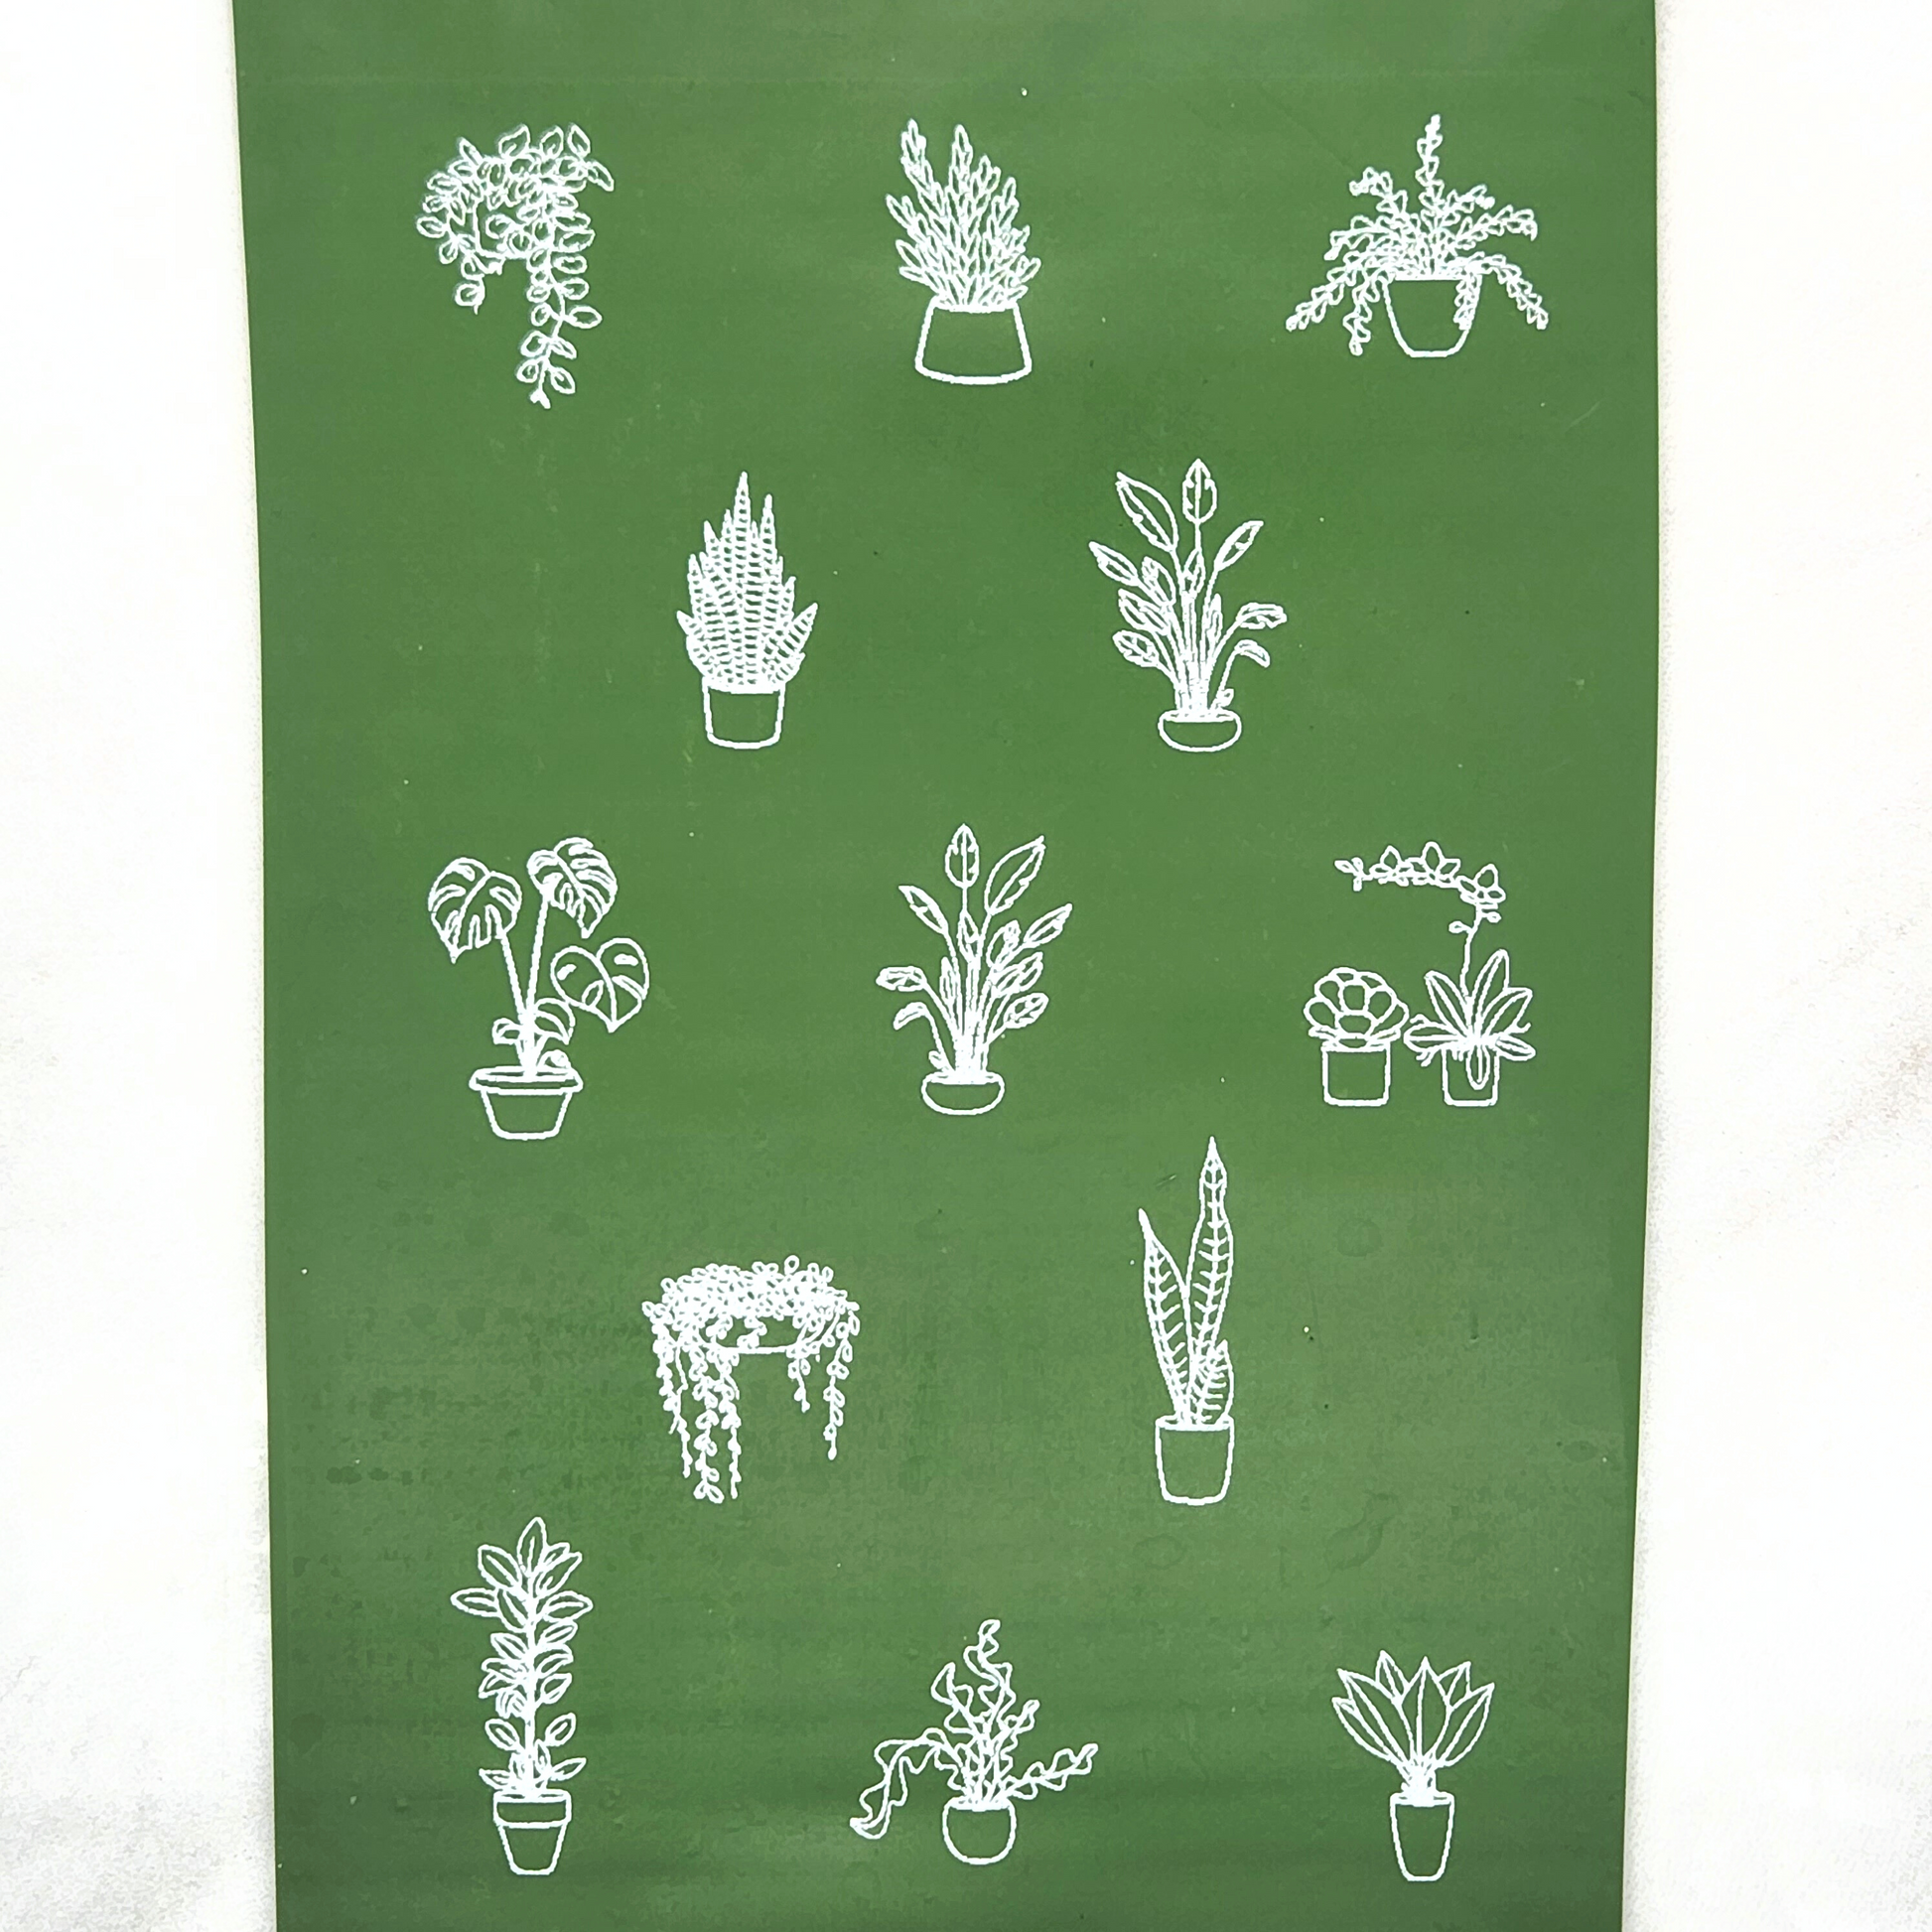 Potted Plants Silk Screen clay painted with acrylic paint on polymer clay slab